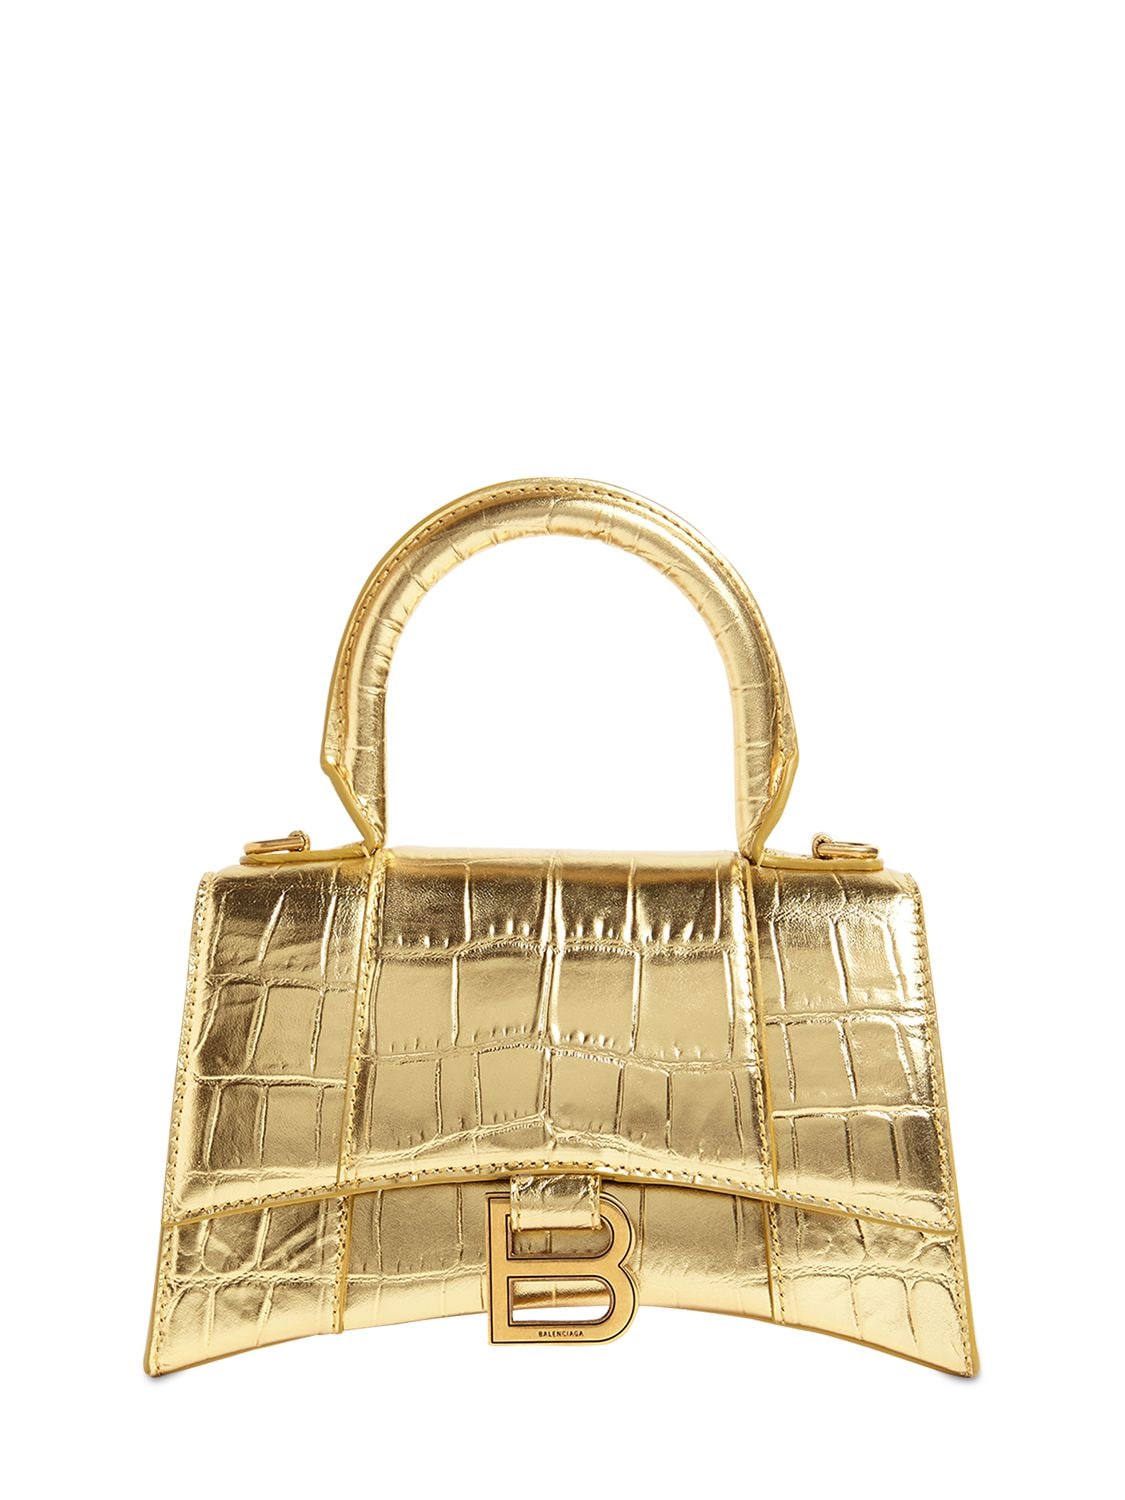 Balenciaga Xs Hourglass Croc Embossed Leather Bag In Gold